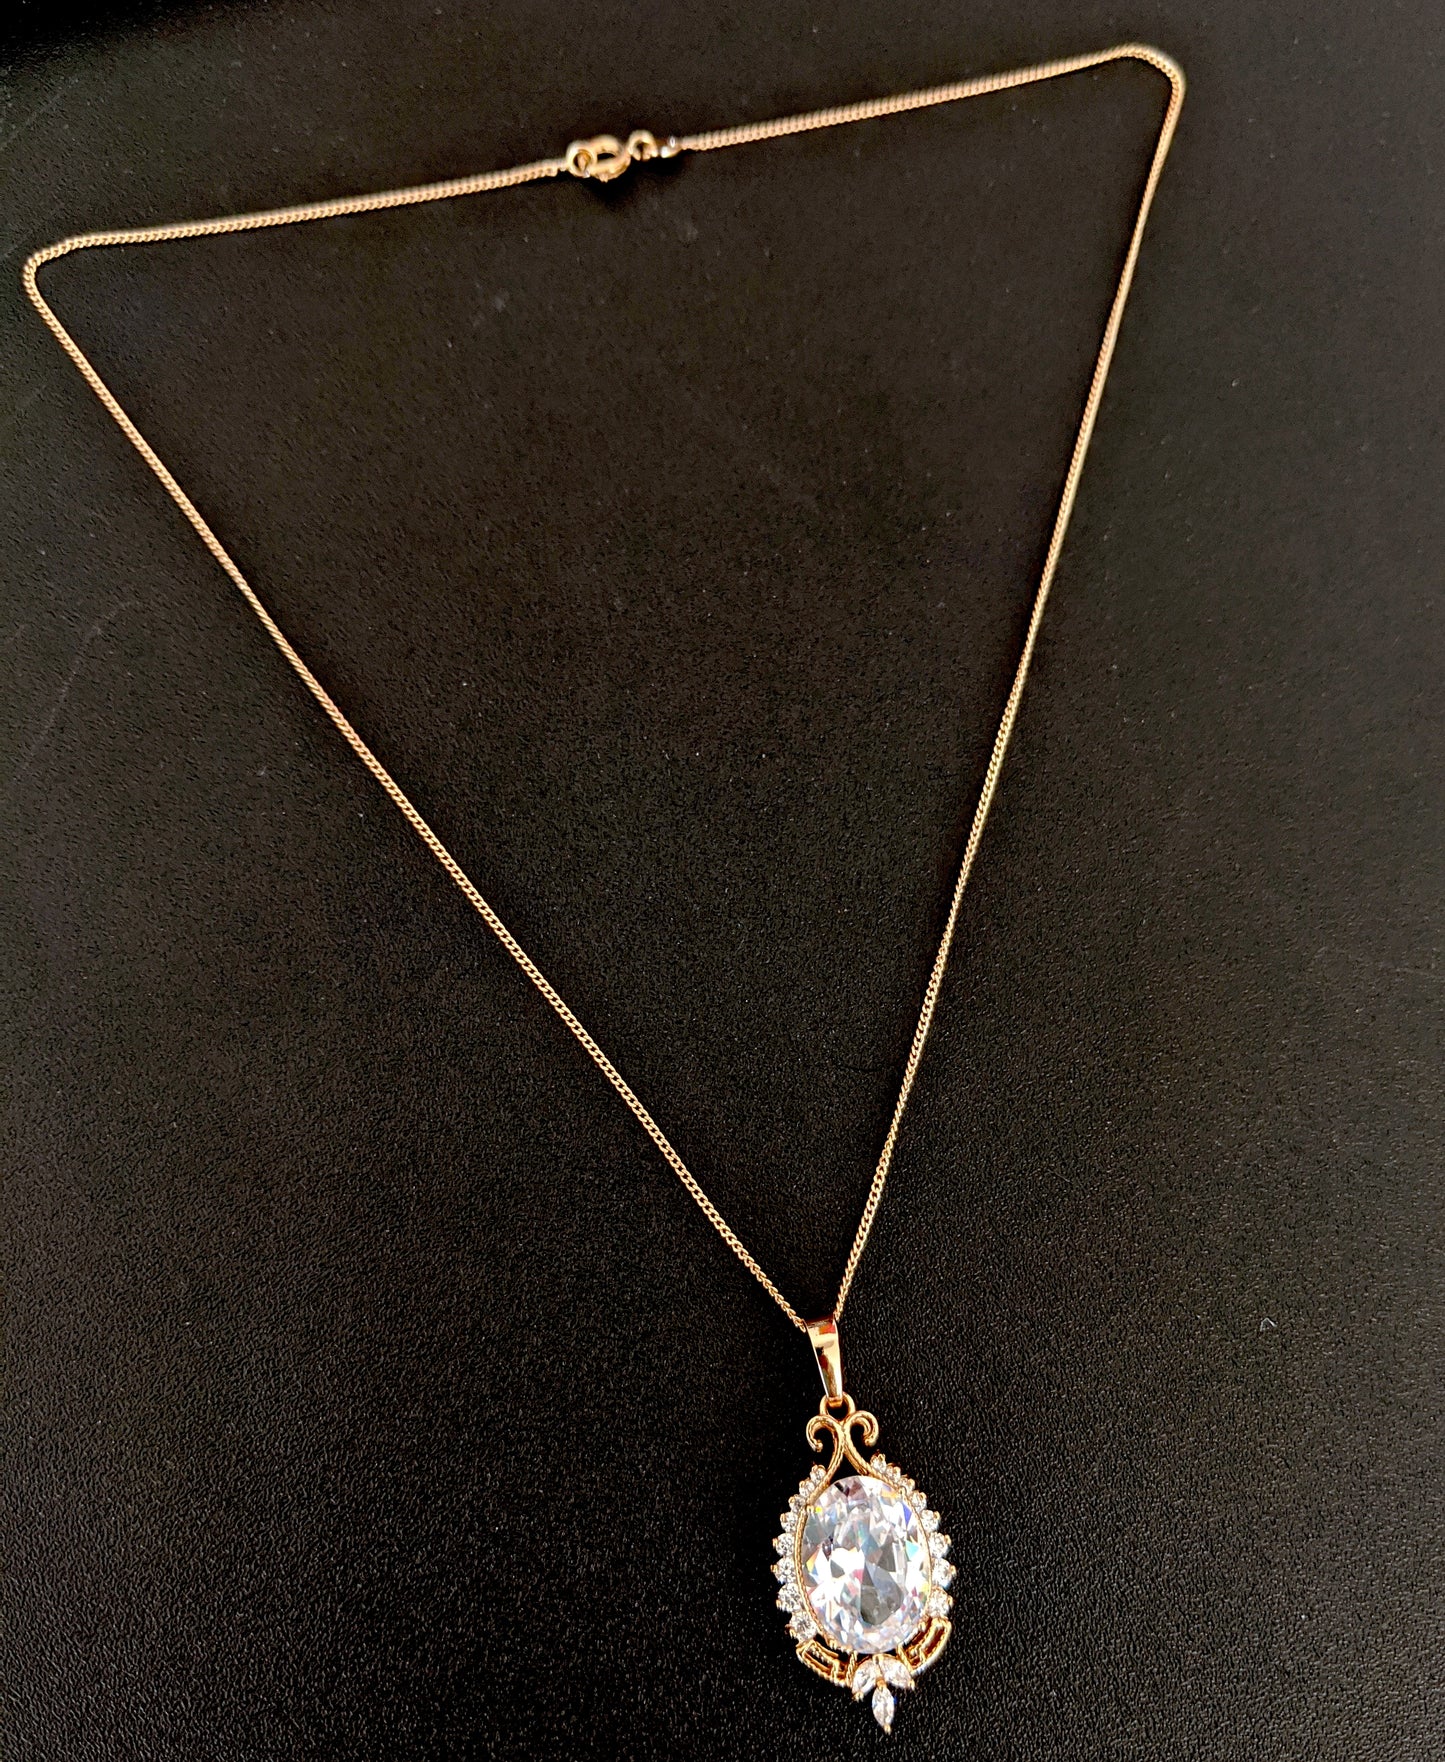 Shiny white CZ pendant with light rose gold link chain necklace - Simpliful